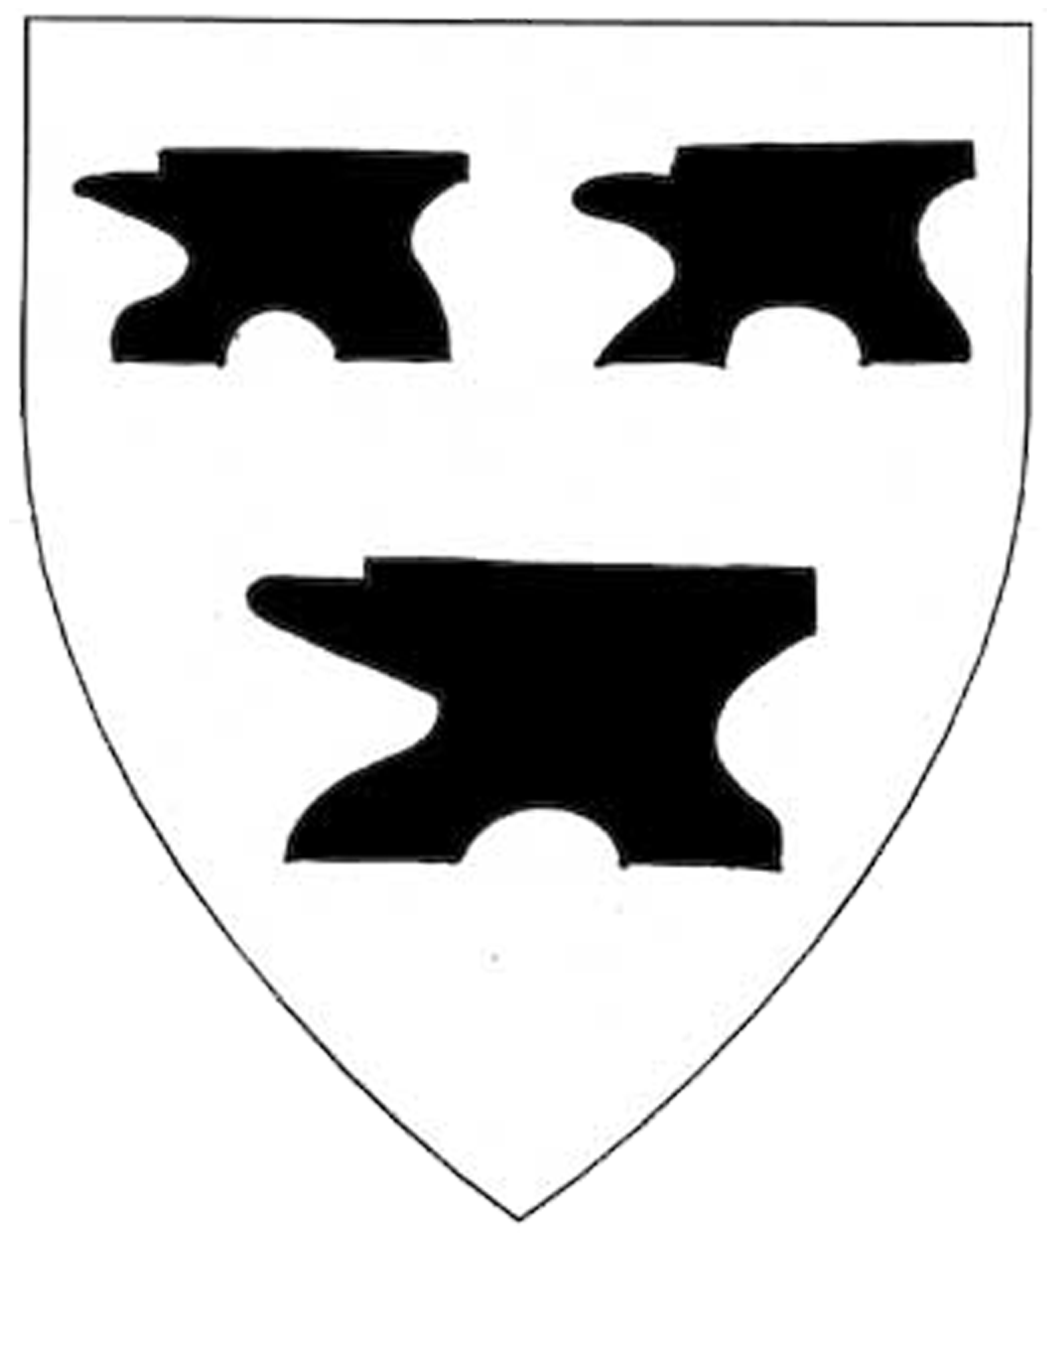 The arms of George Edward Archer